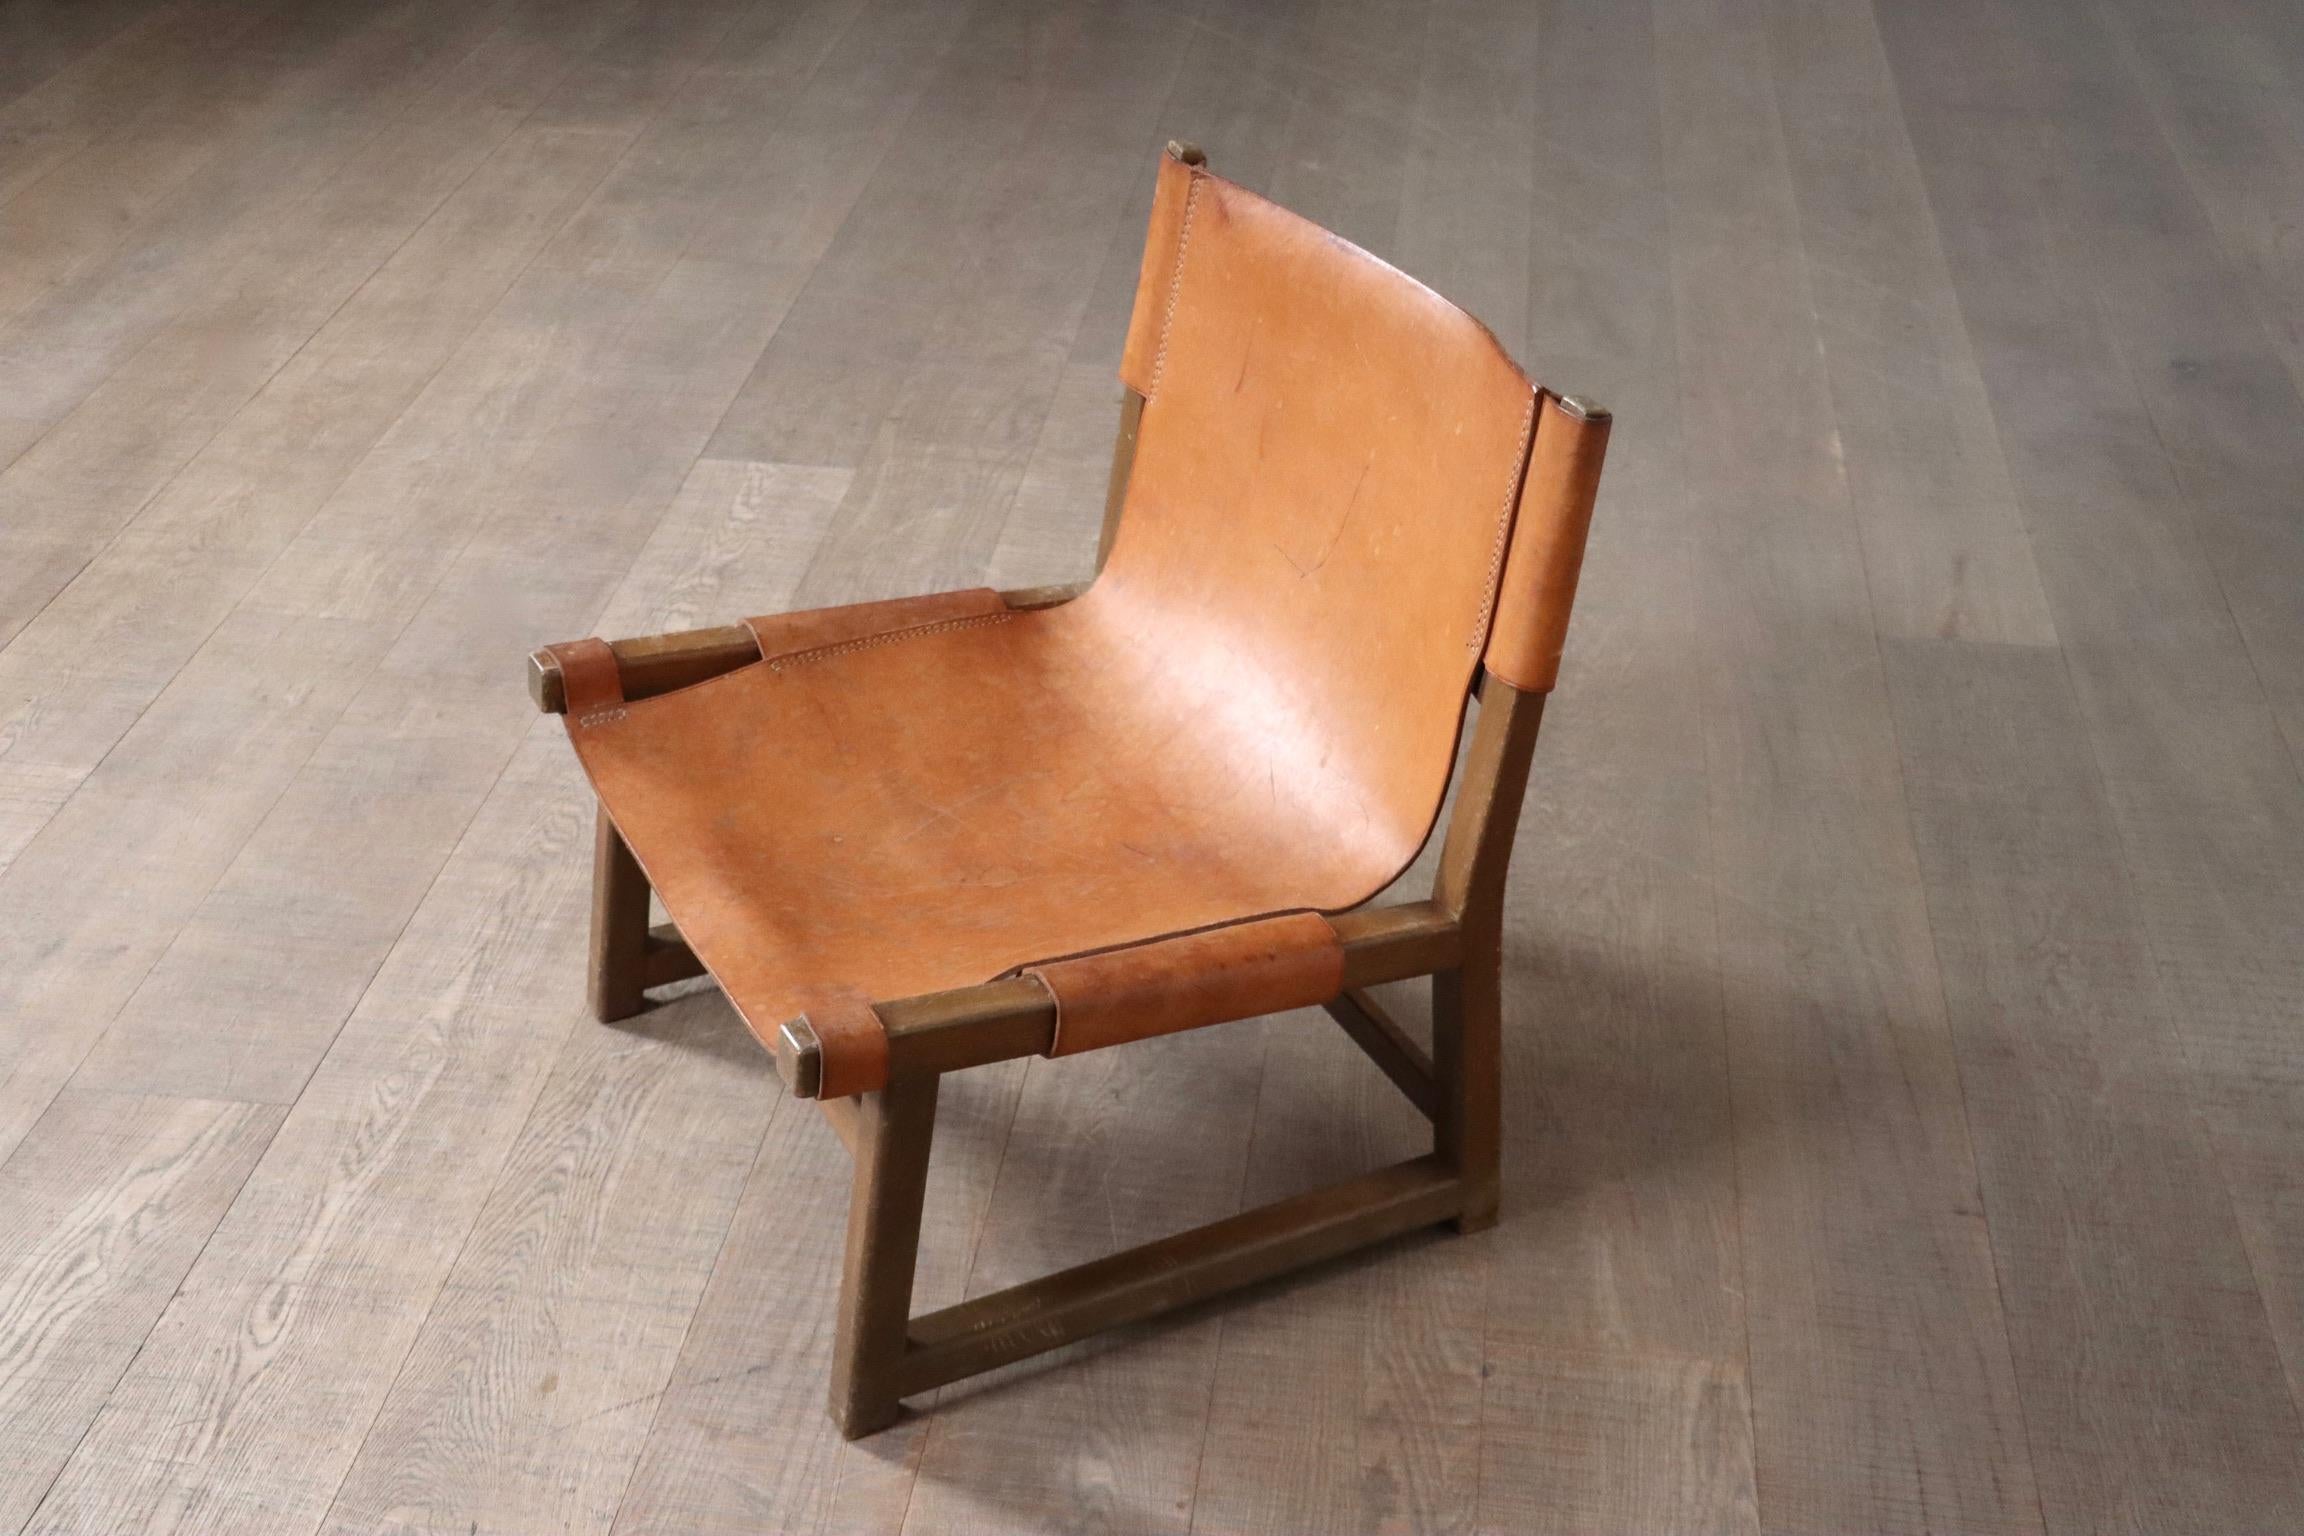 Pair Of Riaza Chairs In Cognac Leather By Paco Muñoz For Darro Gallery, Spain, 1 For Sale 6